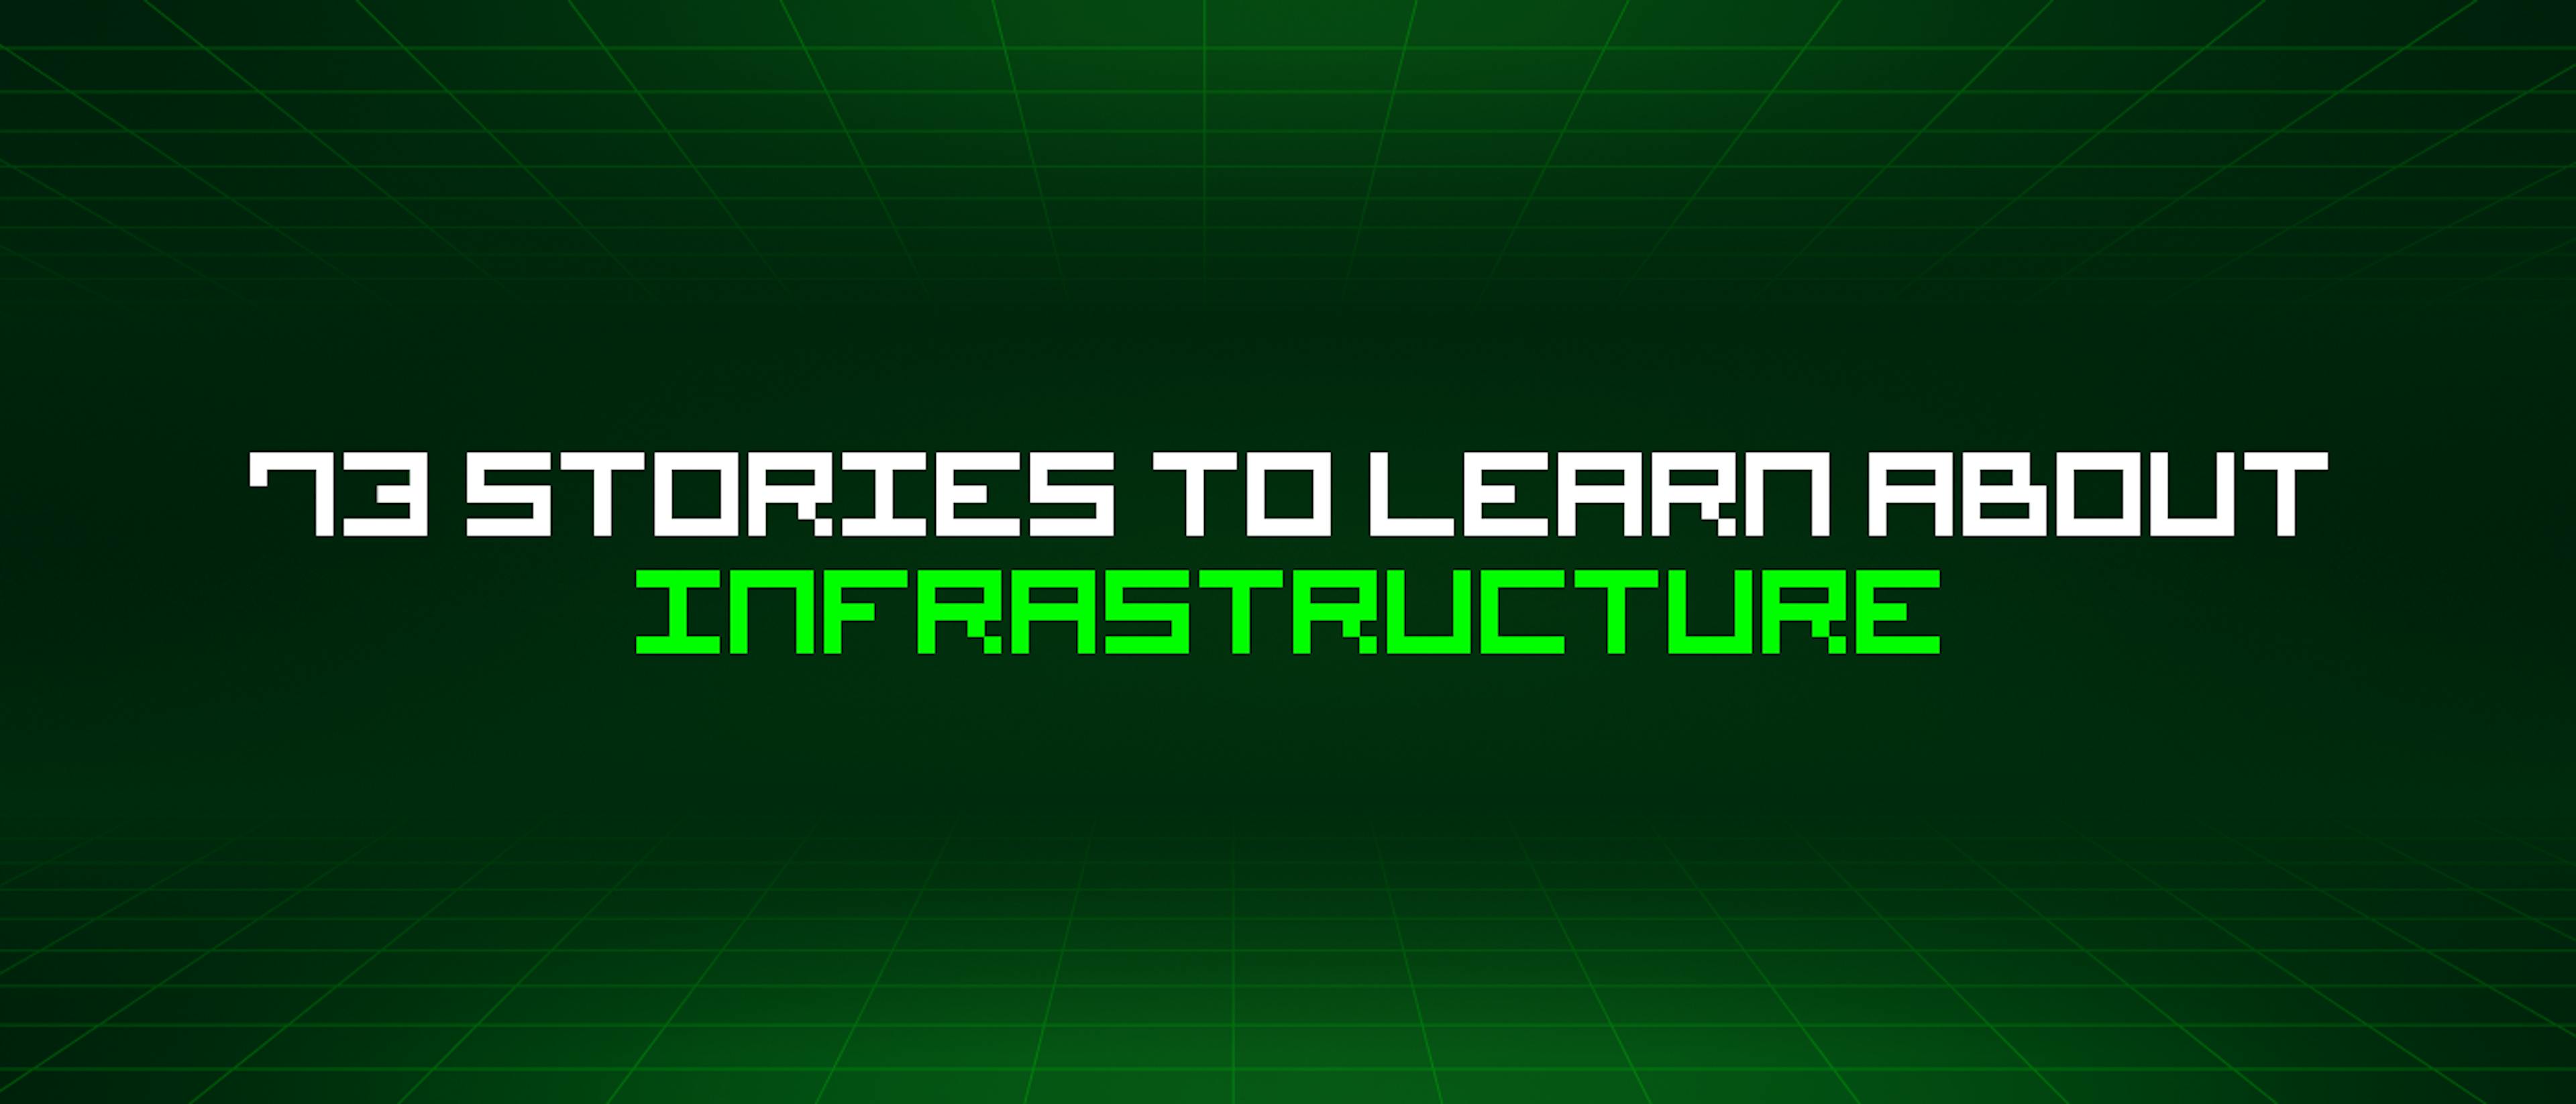 featured image - 73 Stories To Learn About Infrastructure